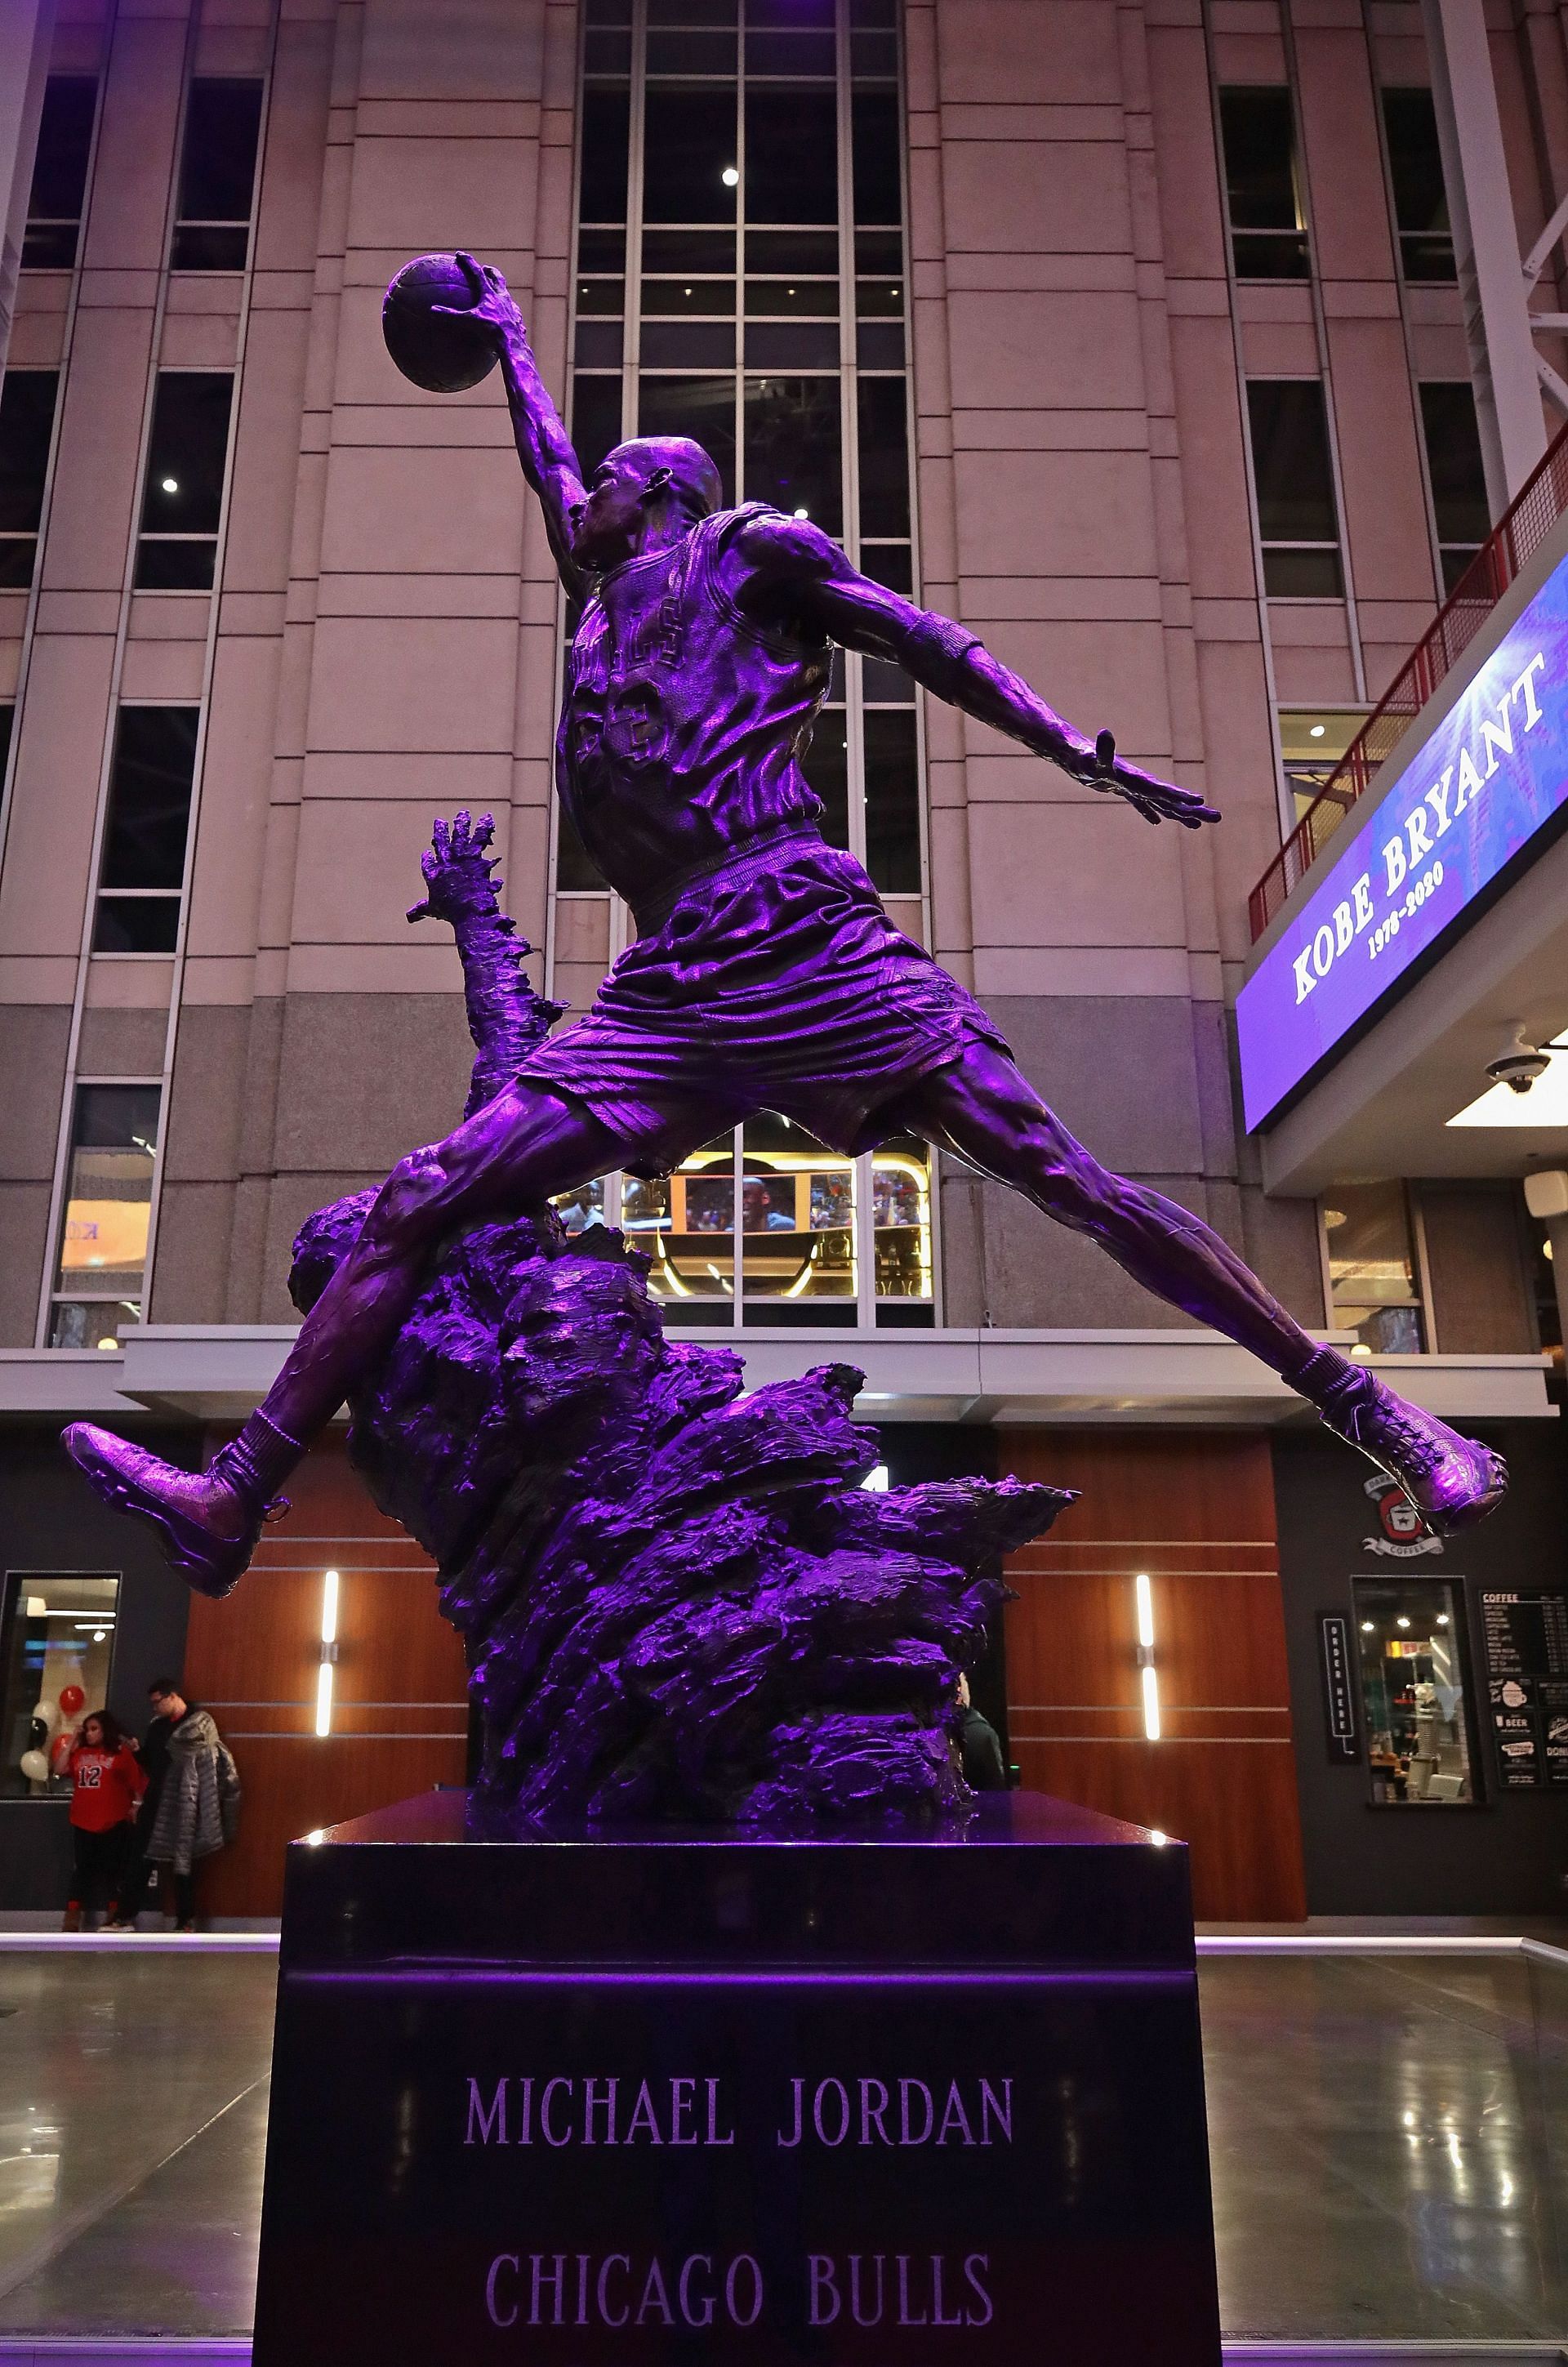 A statue of Jordan at the United Center in Chicago.